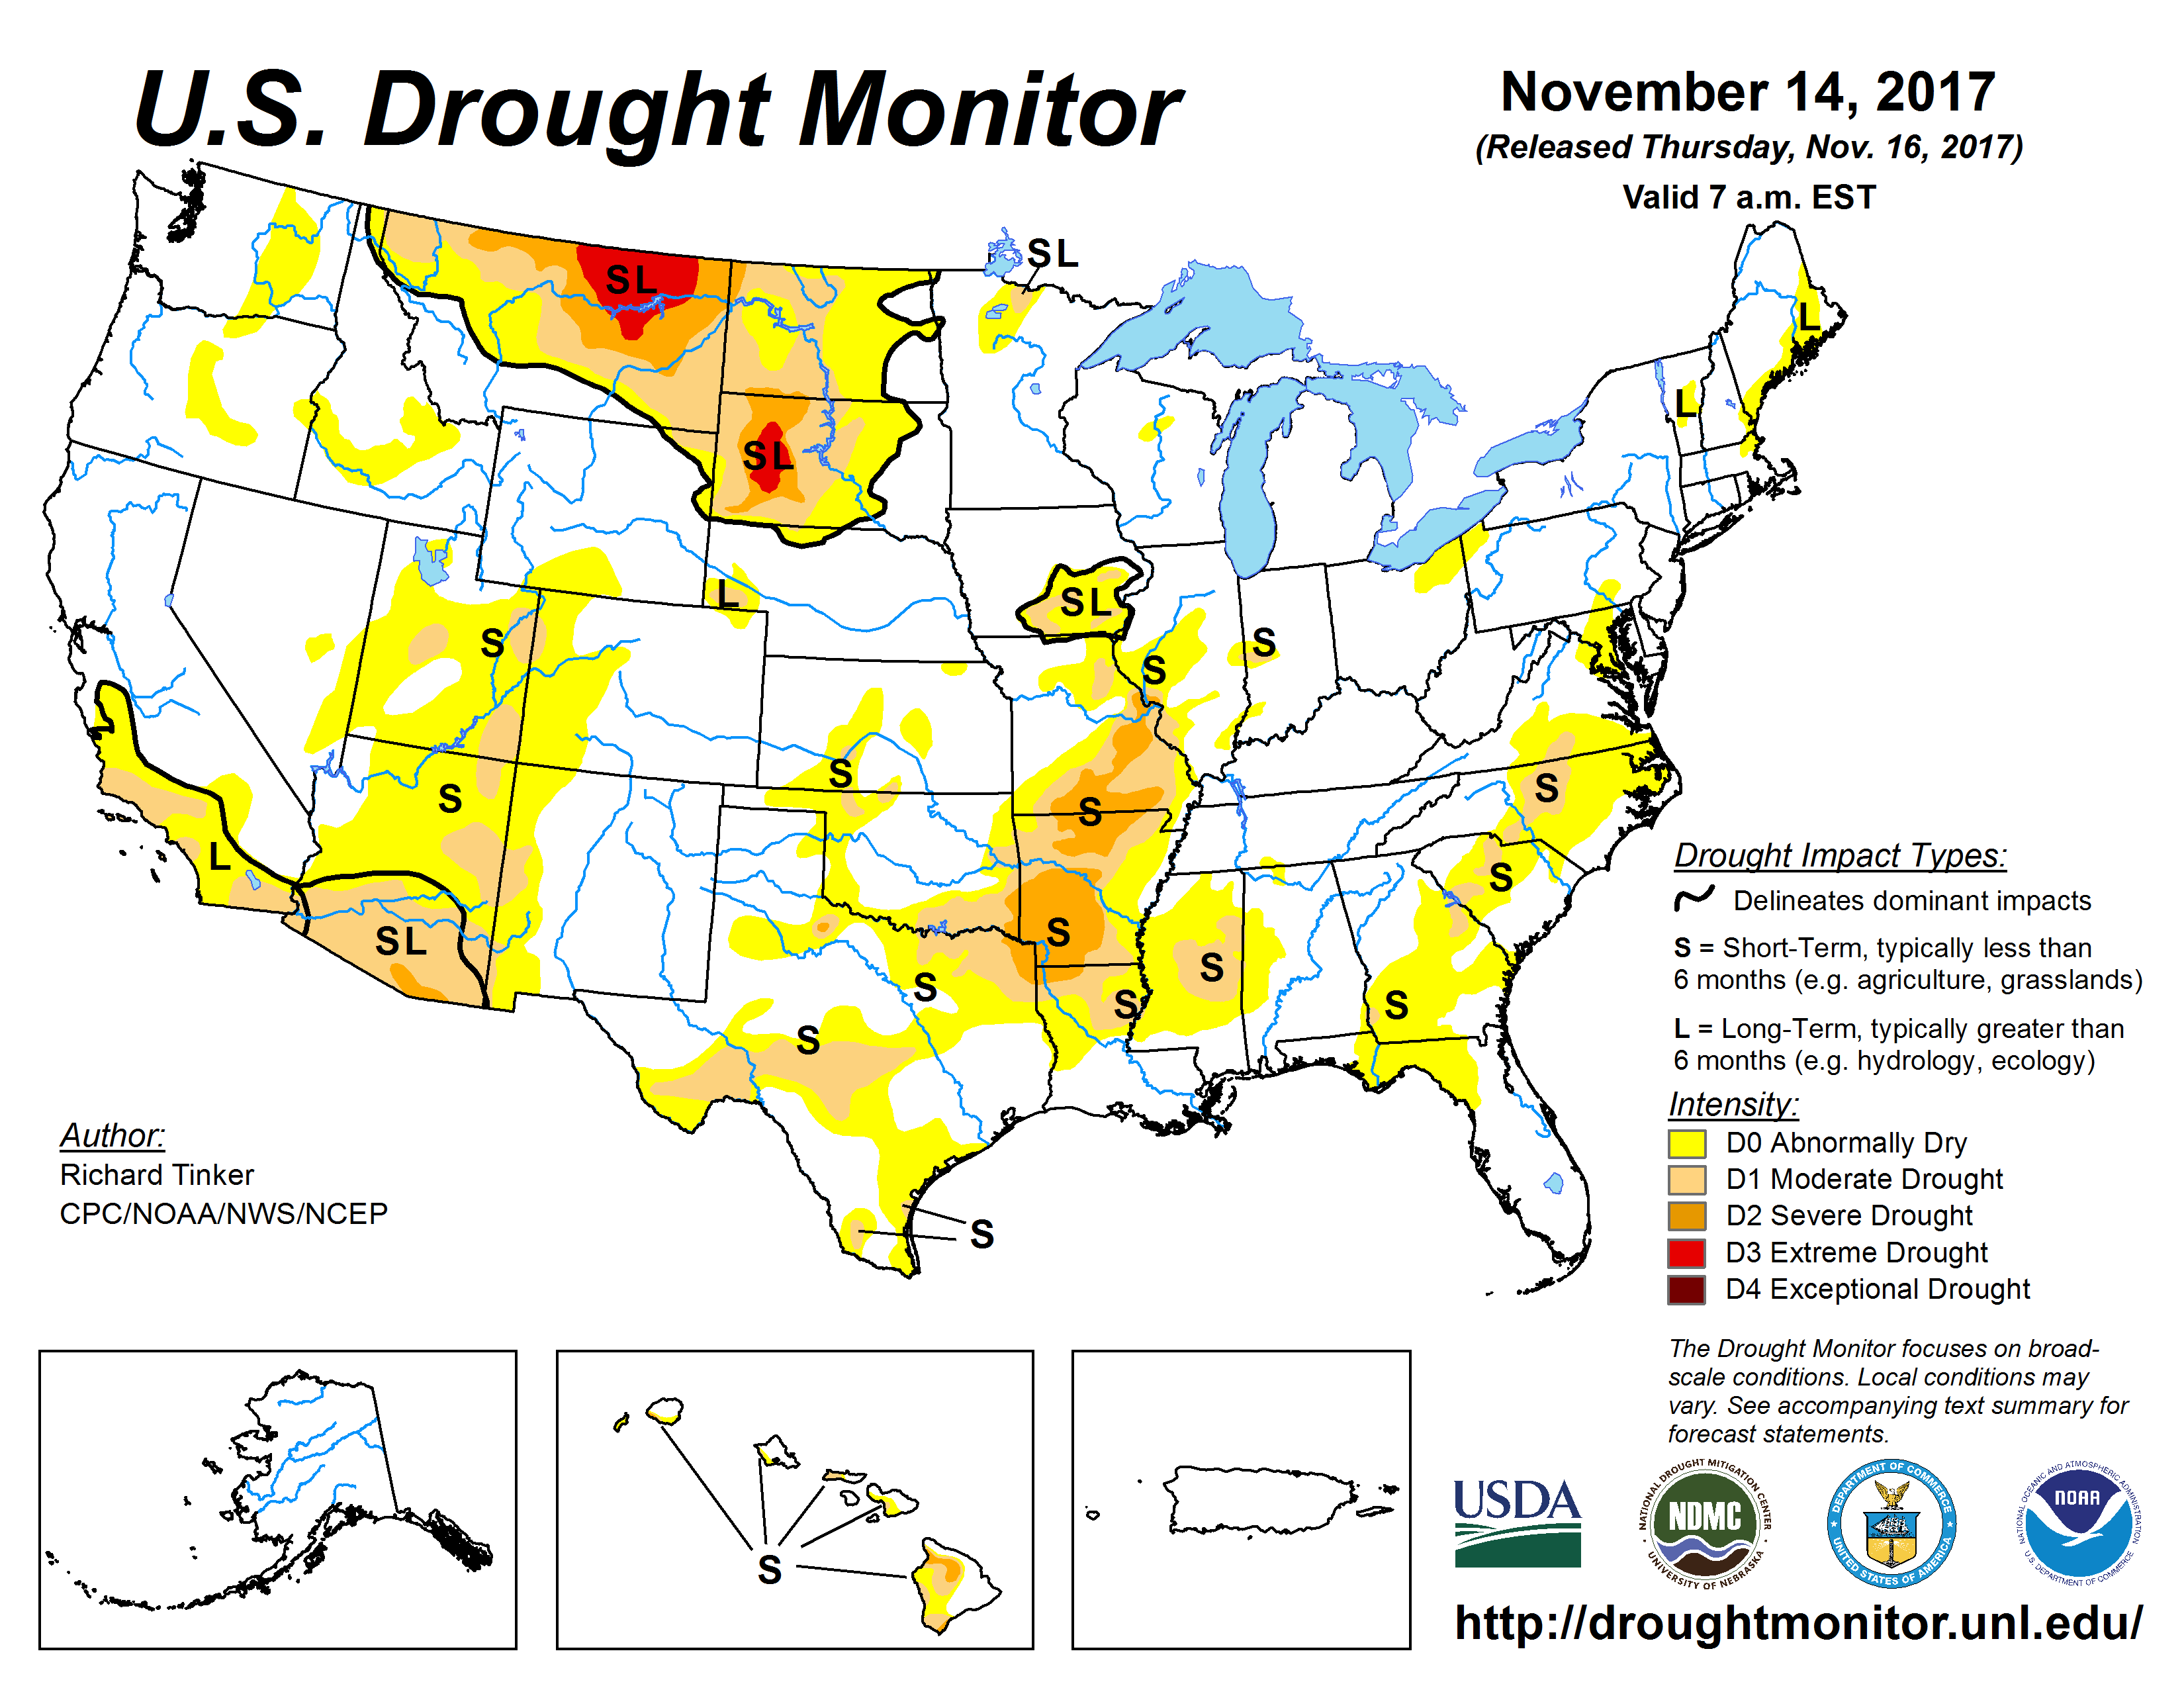 U.S. Drought Monitor Update for November 14, 2017 National Centers